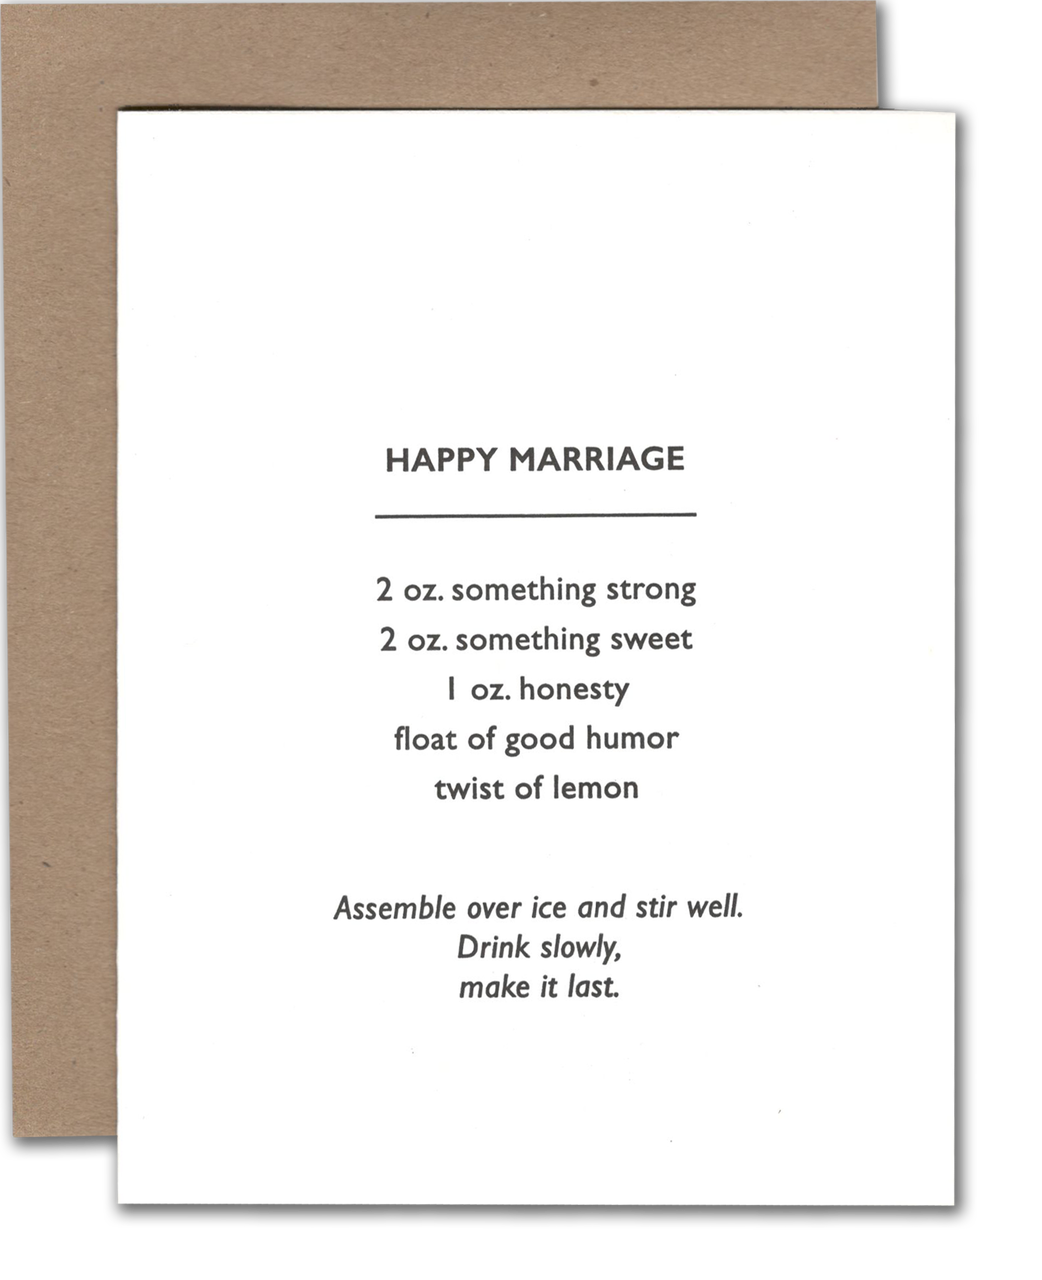 Power and Light Letterpress - PLL Marriage Cocktail (Happy Marriage) Card